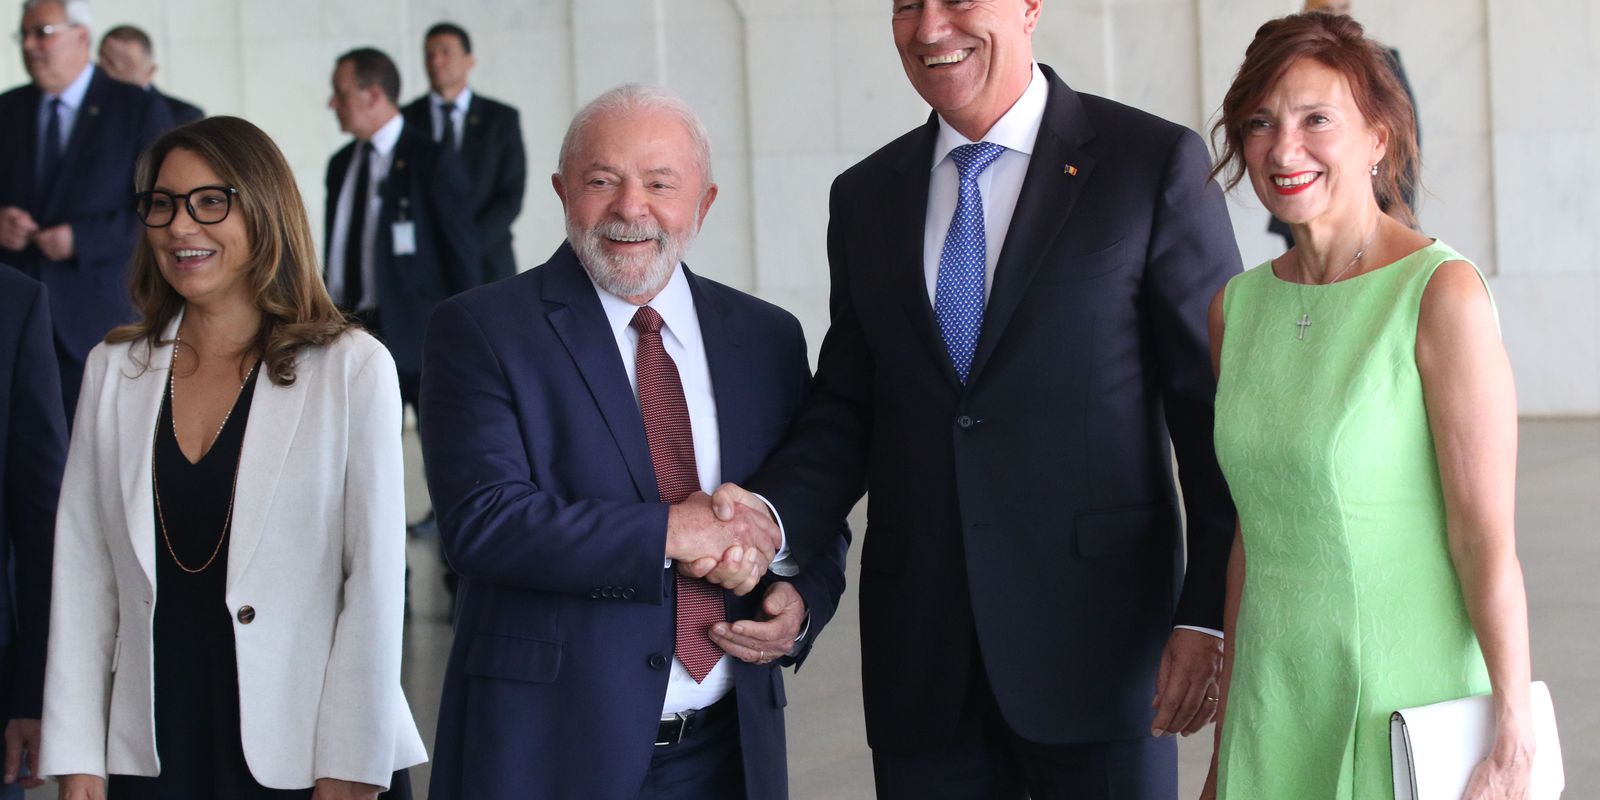 Lula wants to expand relations with Romania in agriculture and defense